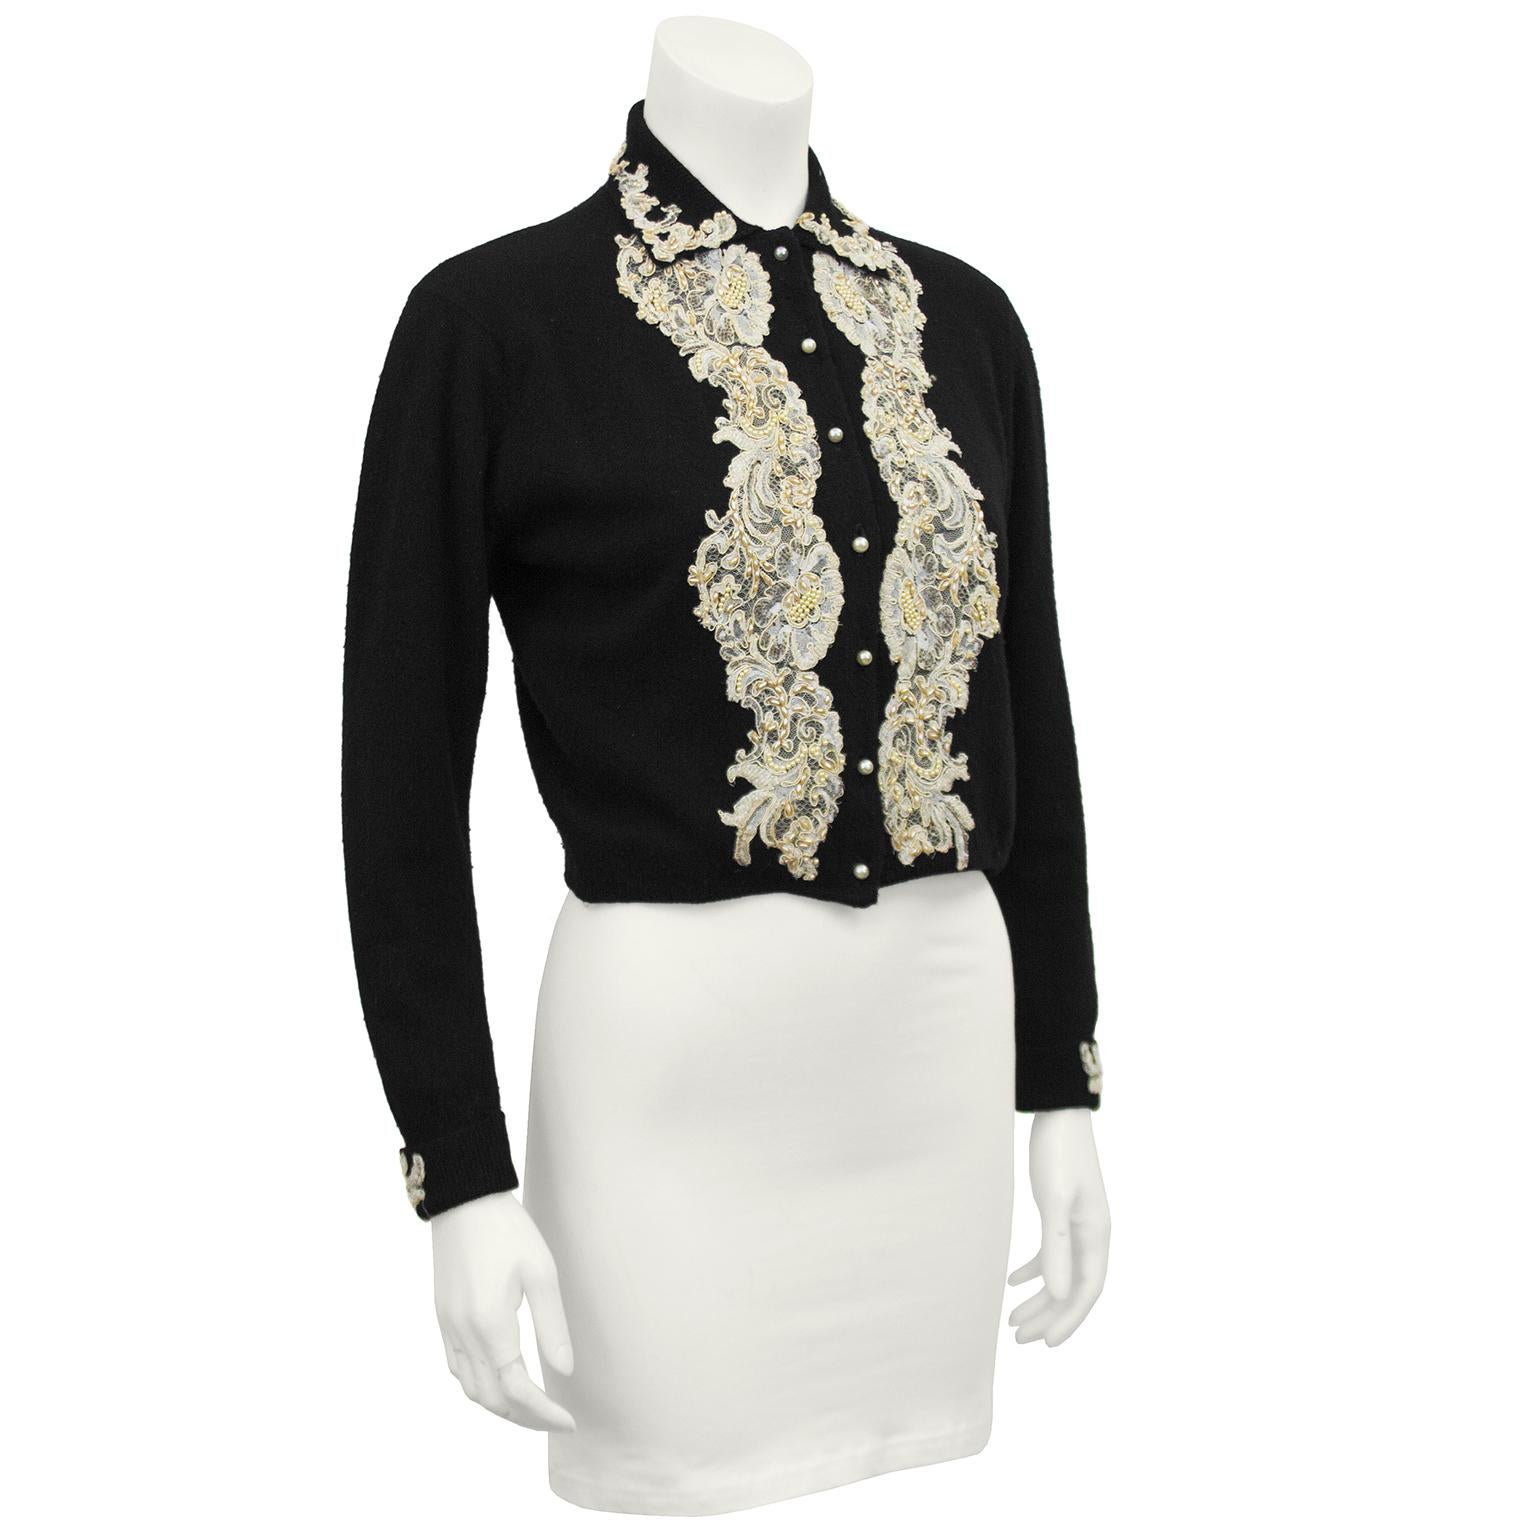 Gorgeous black cashmere cardigan sweater from the 1950s. Beautifully made with cream lace and pearl applique along the collar, down the front, on the cuffs and in floral patches over the back. Pearl buttons down the front with hidden snaps for added